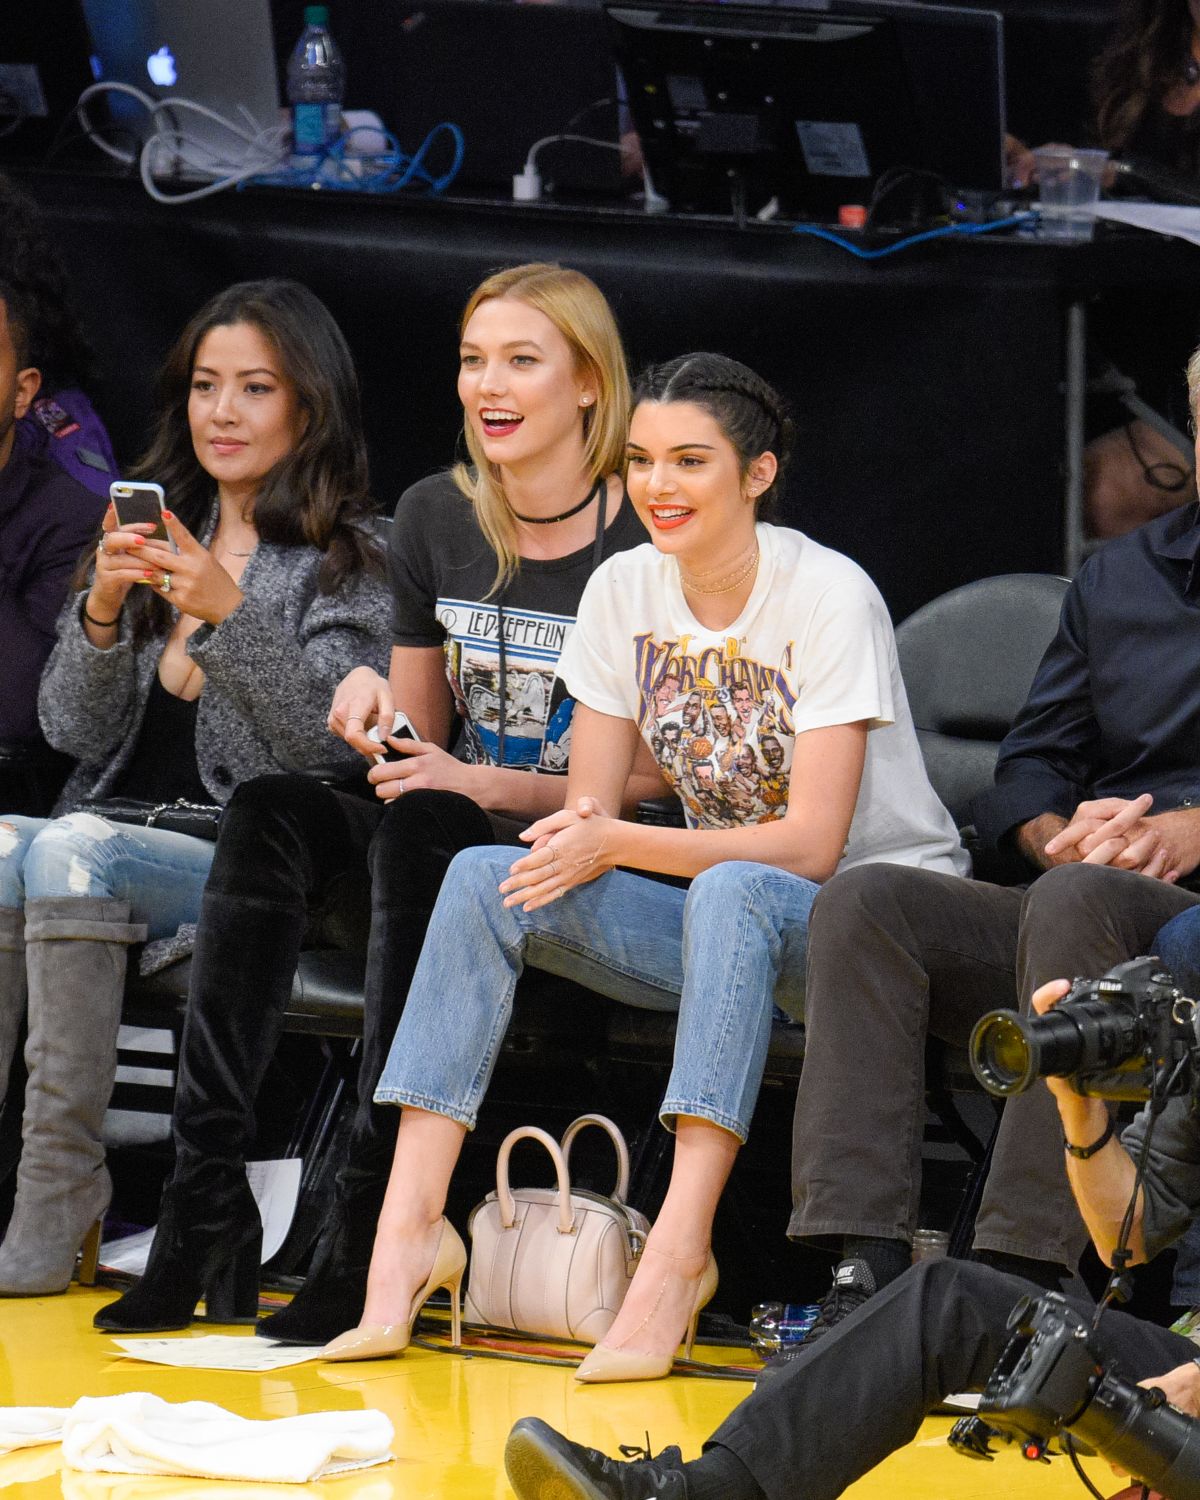 KENDALL JENNER and KARLIE KLOSS at Houston Rockets vs LA Lakers Game in Los Angeles 10 ...